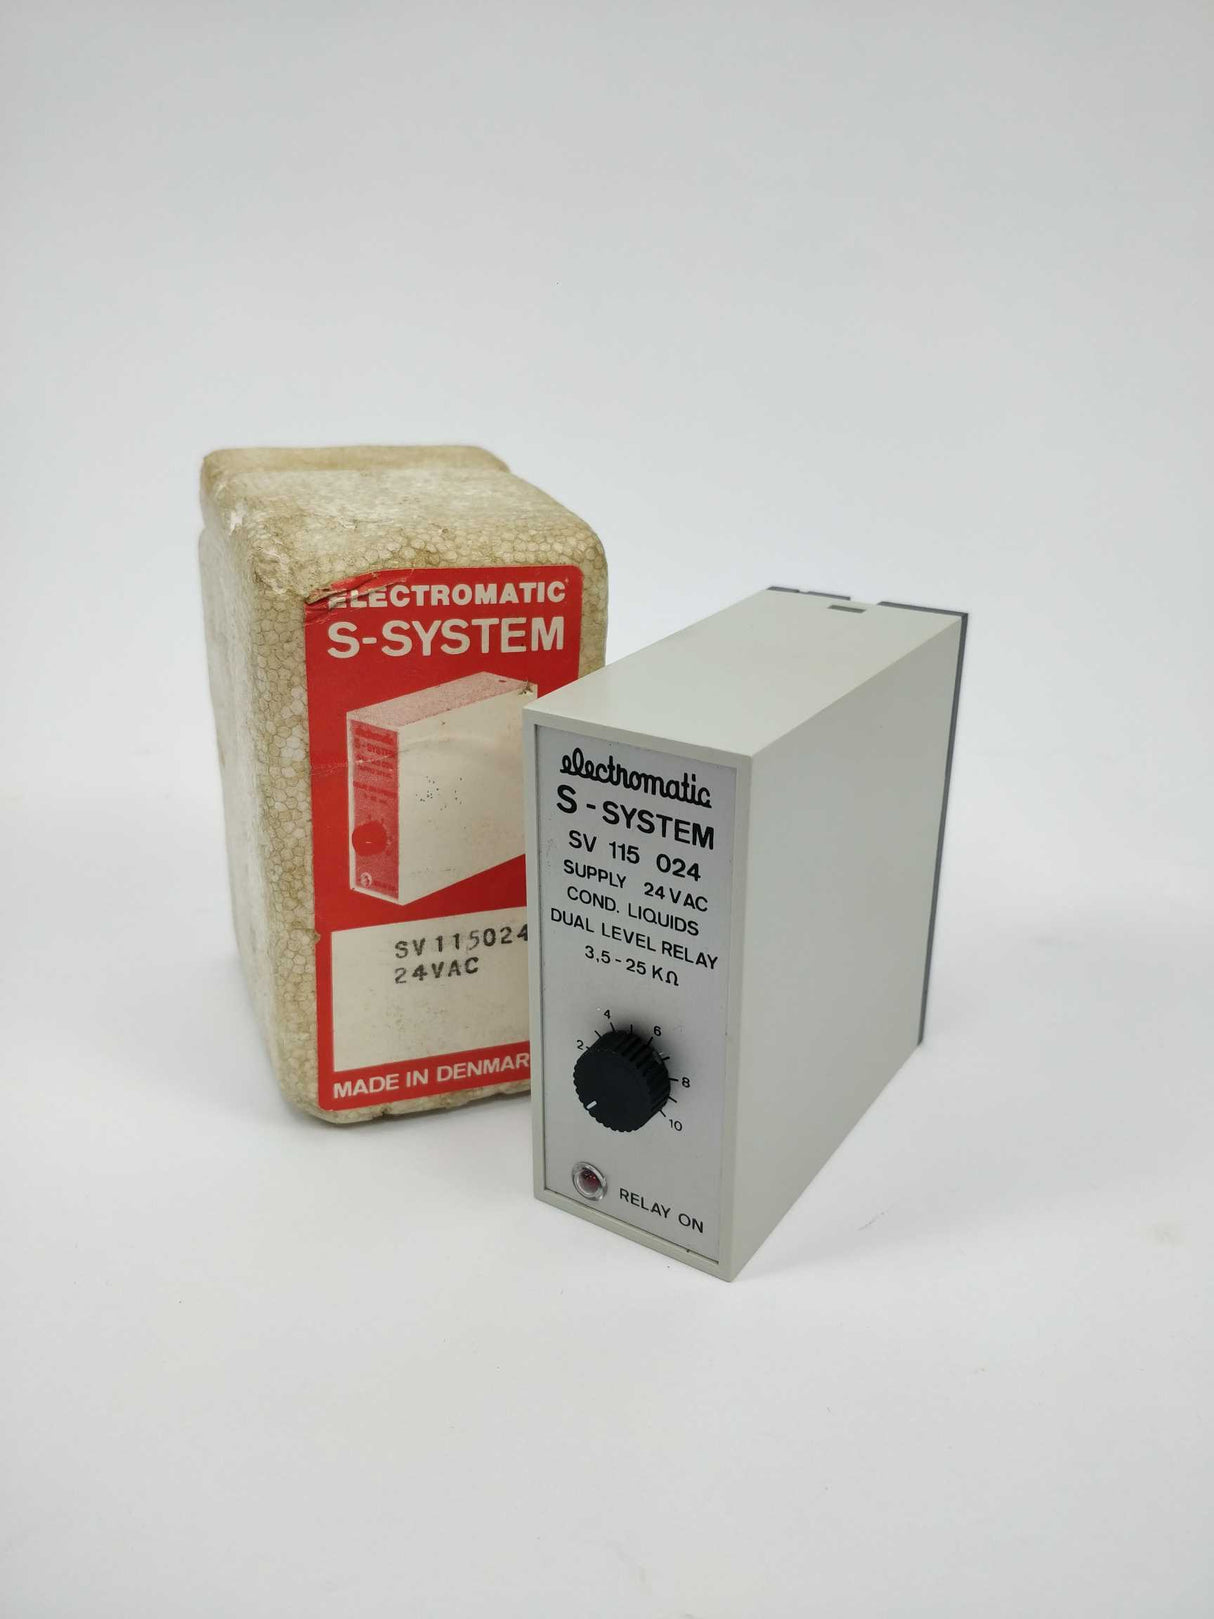 Electromatic SV 115 024 S - System Cond. liquids dual level relay 24VAC